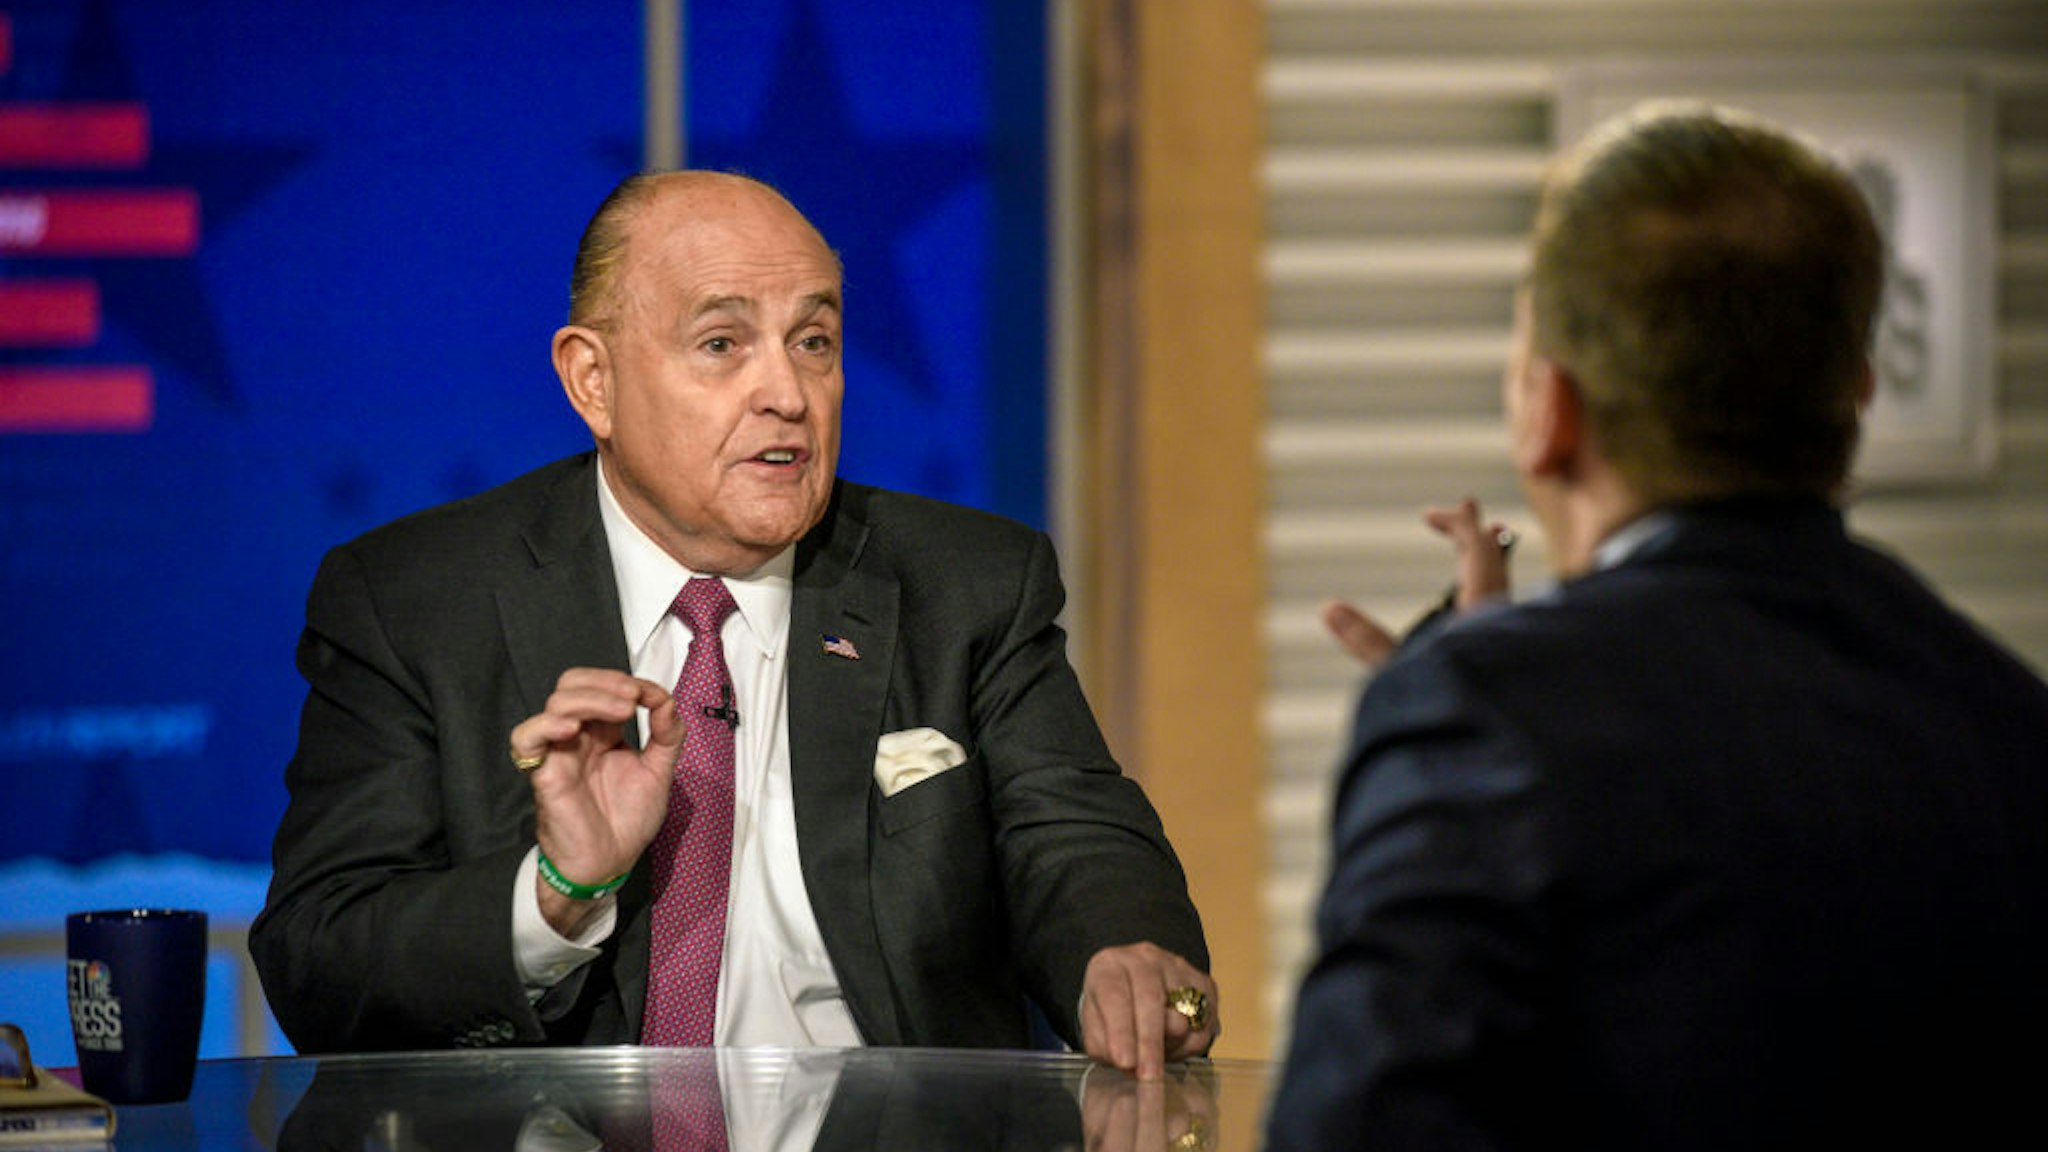 Rudy Giuliani, Lawyer for President Donald Trump, appears on "Meet the Press" in Washington, D.C., Sunday, April 21, 2019. (Photo by: William B. Plowman/NBC/NBC Newswire/NBCUniversal via Getty Images)